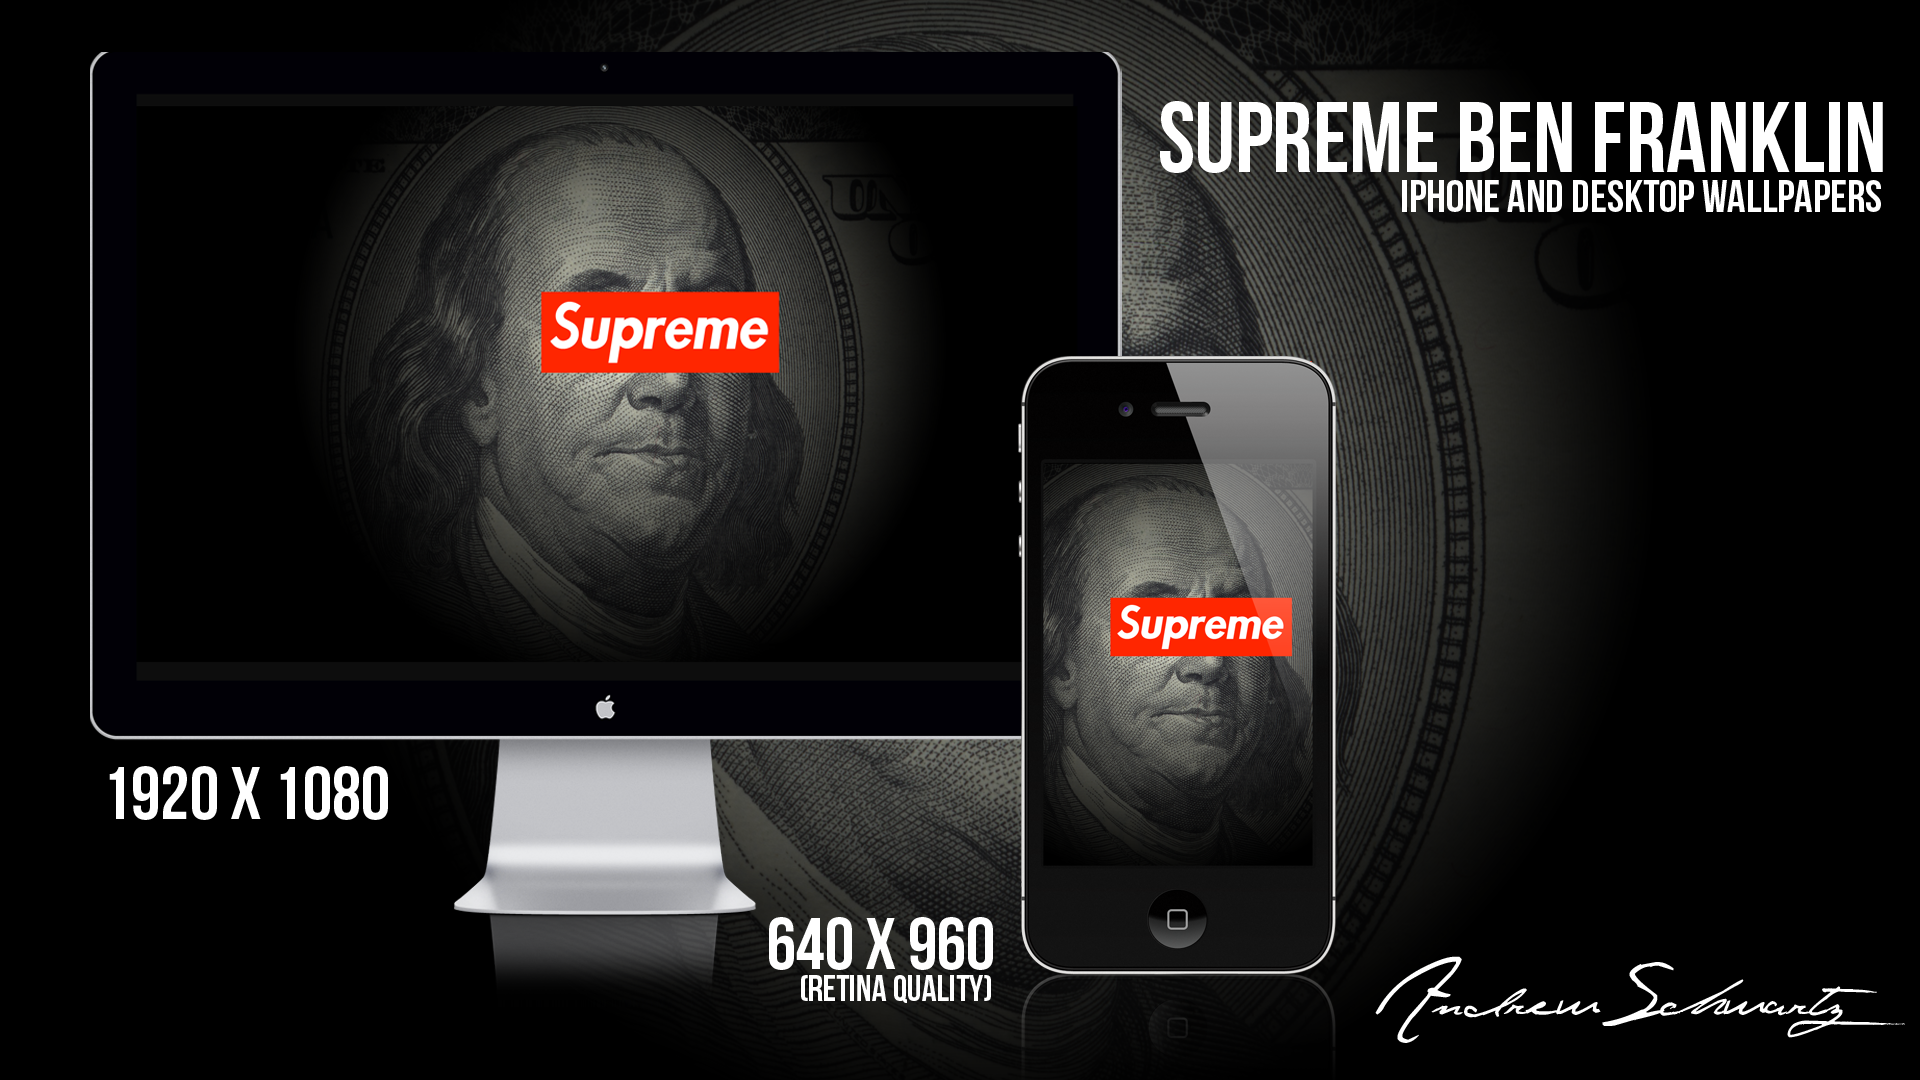 Supreme Clothing Wallpapers